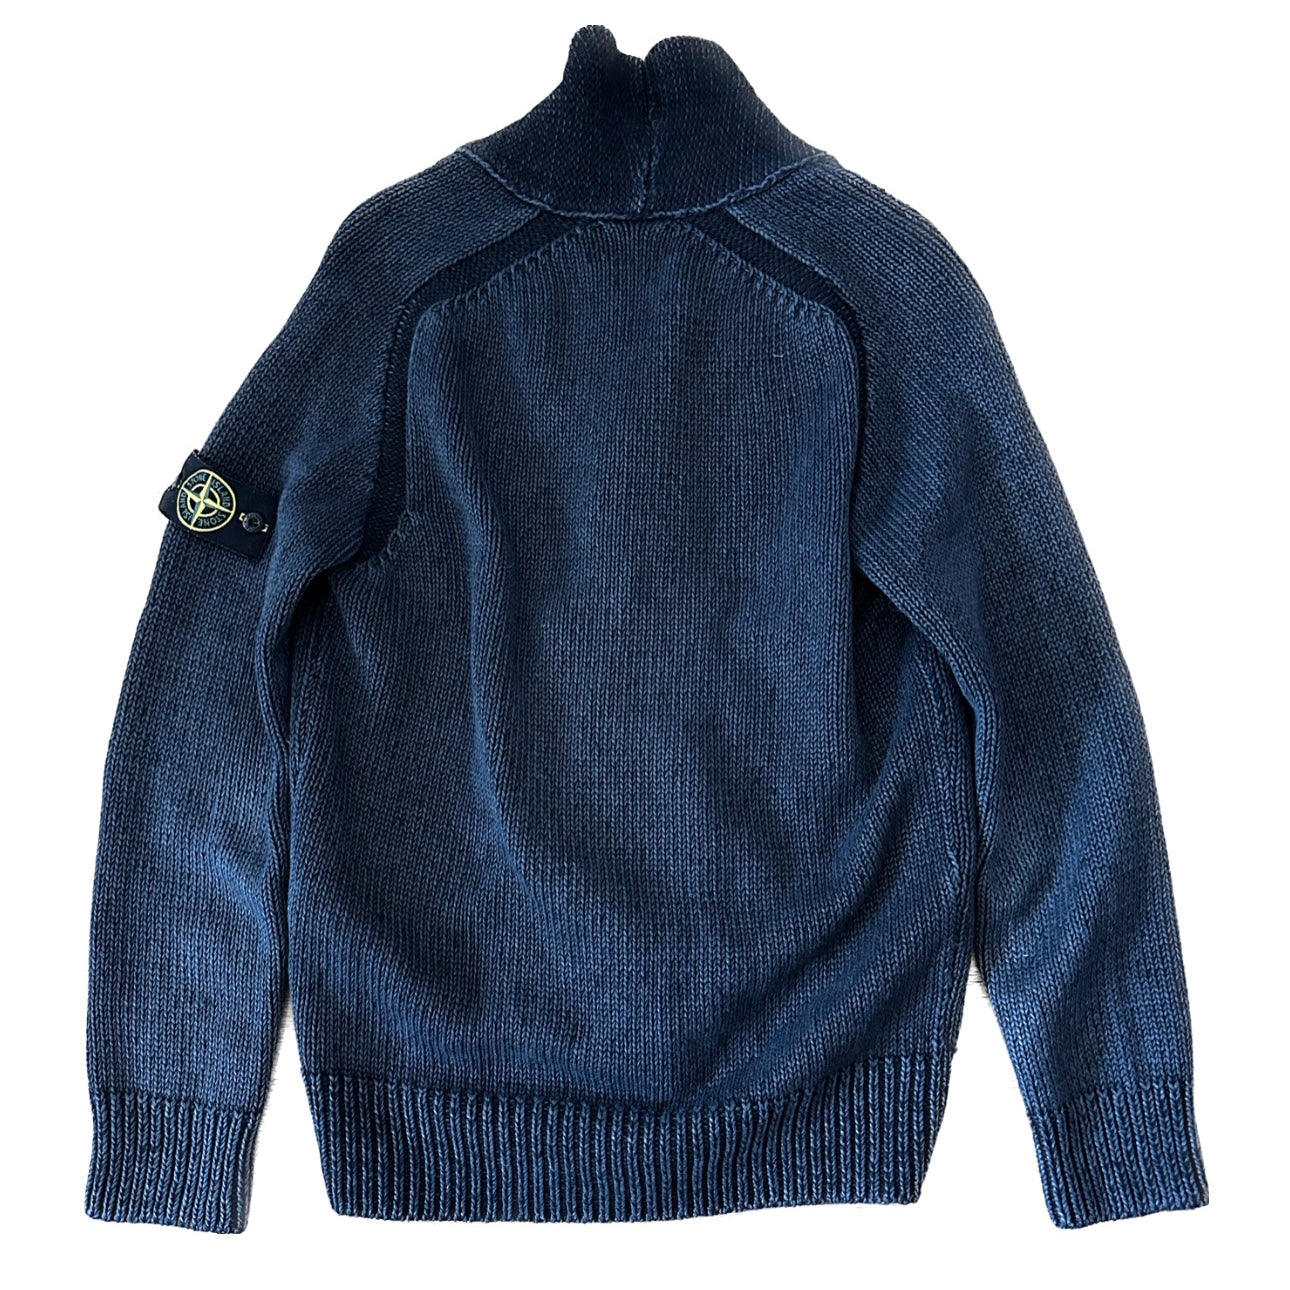 Stone Island 2012 Knit Cardigan - L - Made in Italy